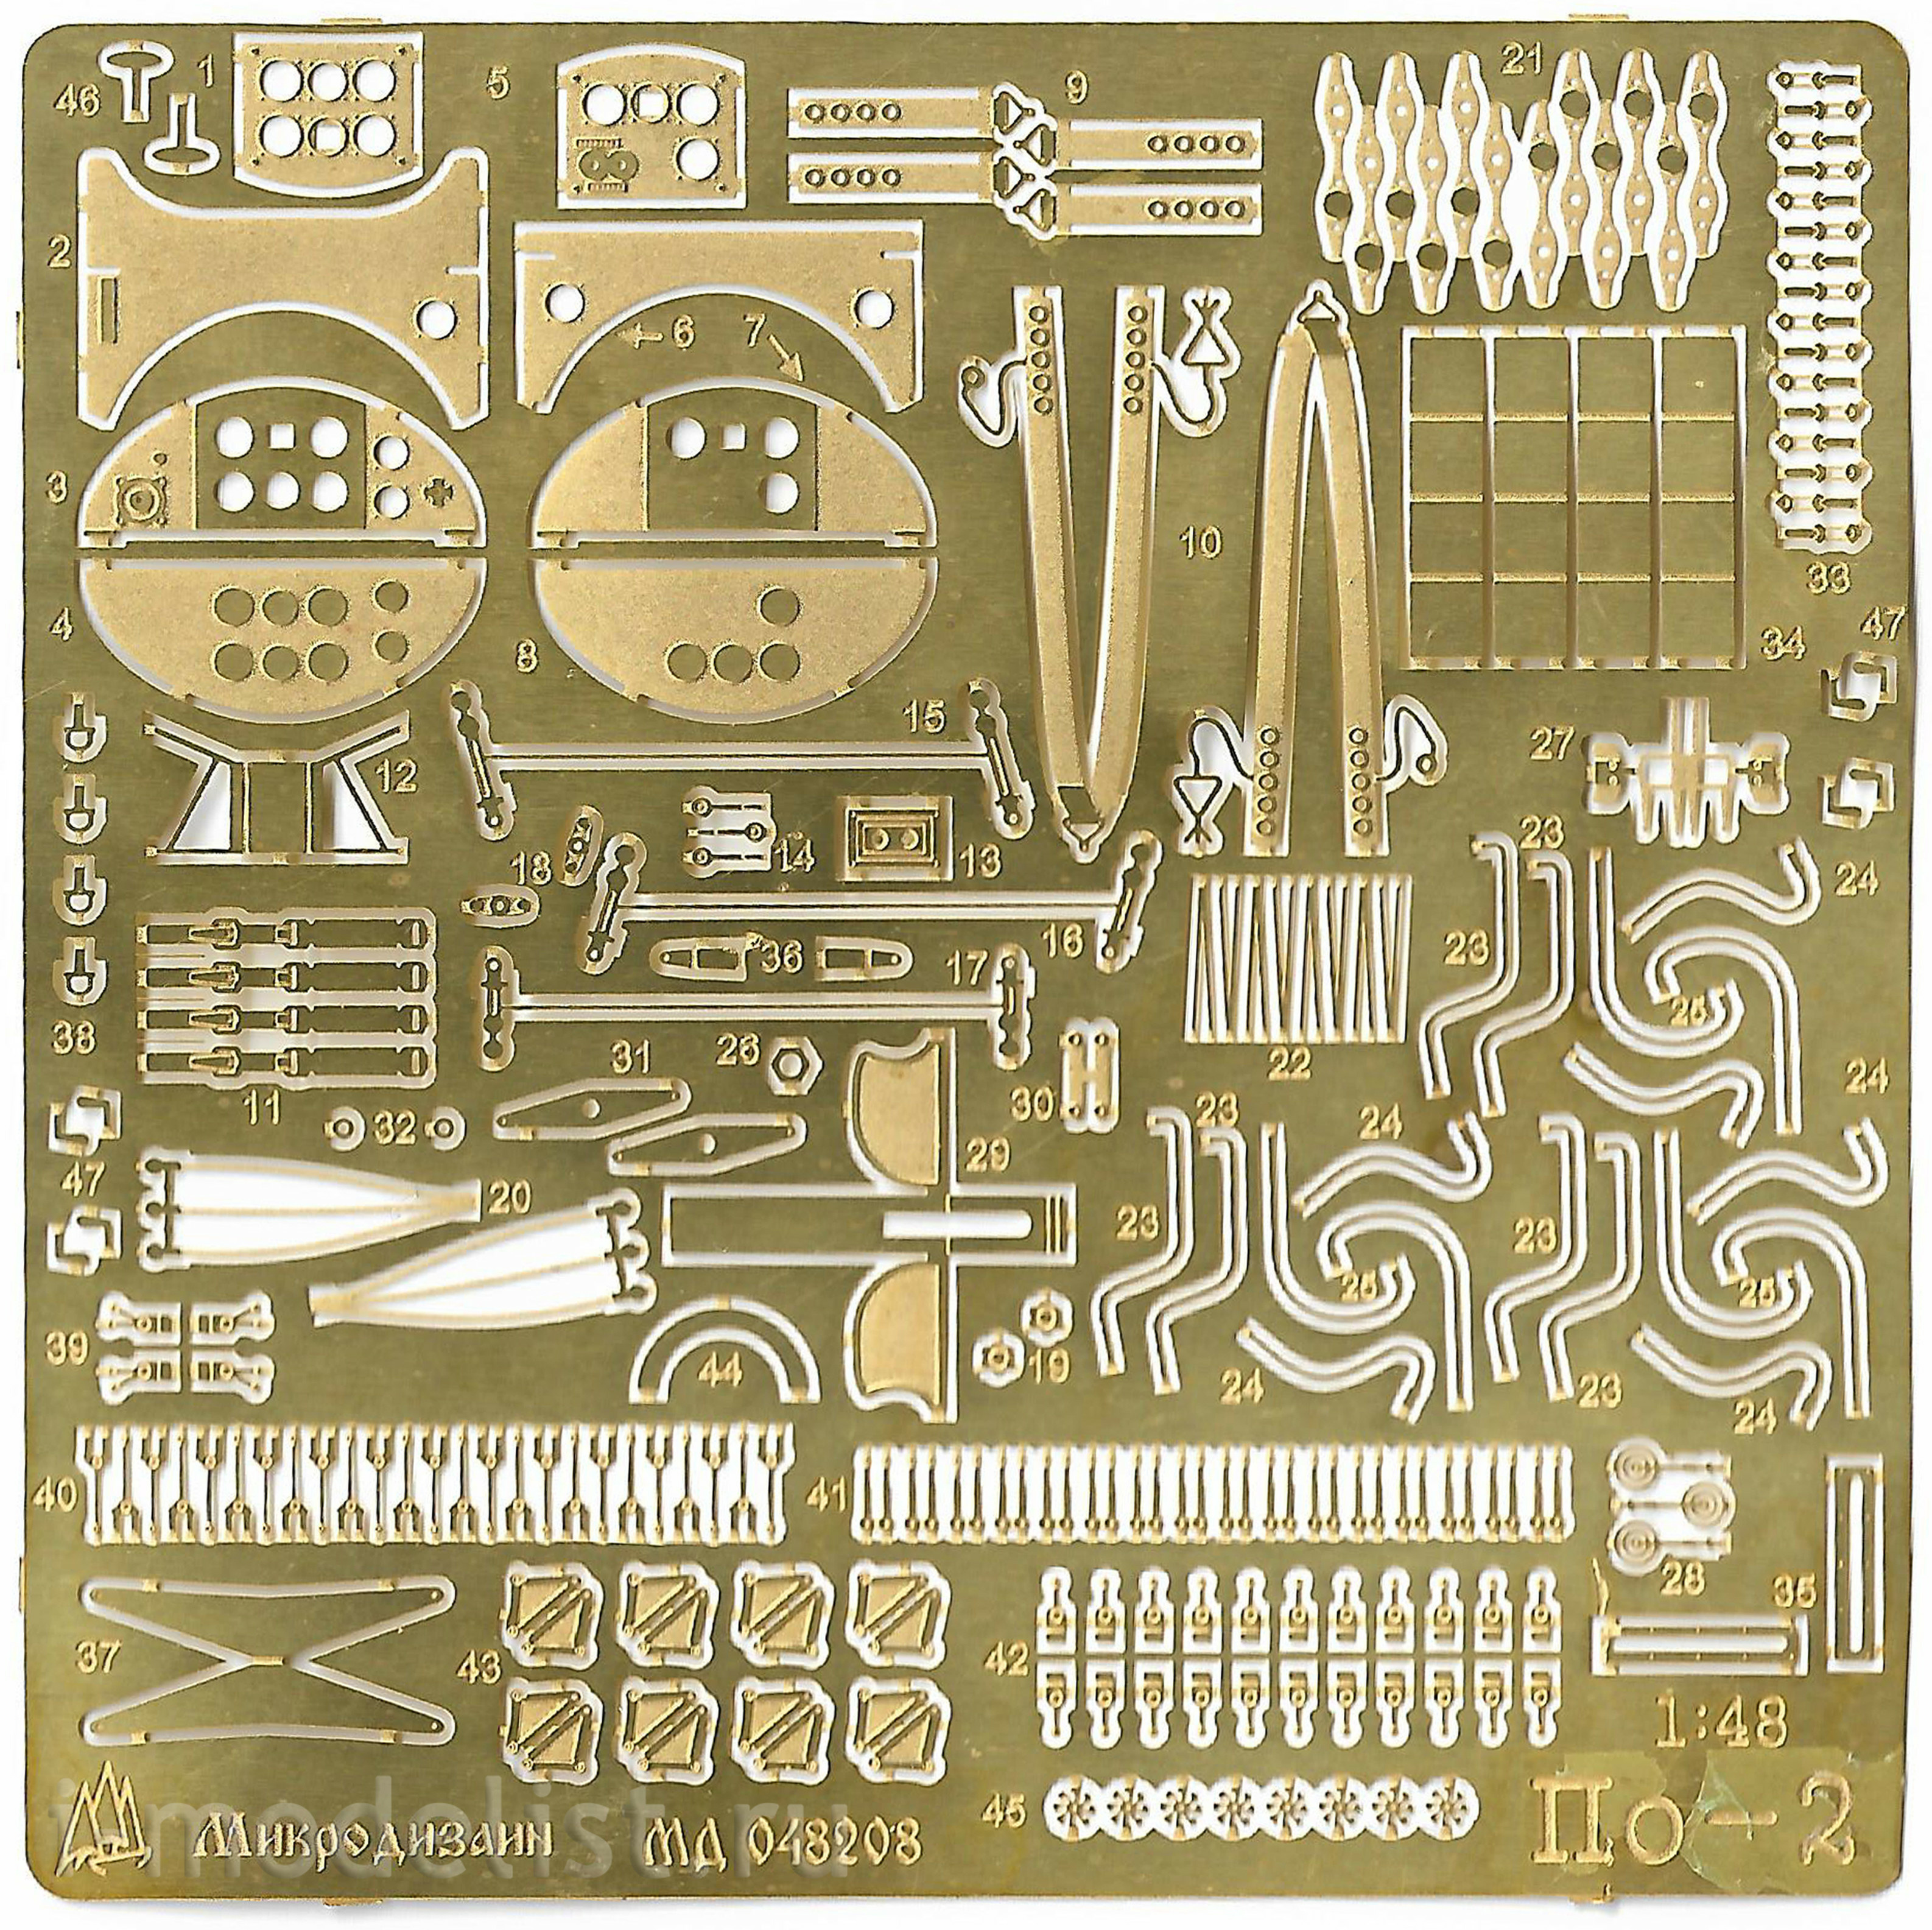 048208 Microdesign 1/48 Po-2 from ICM